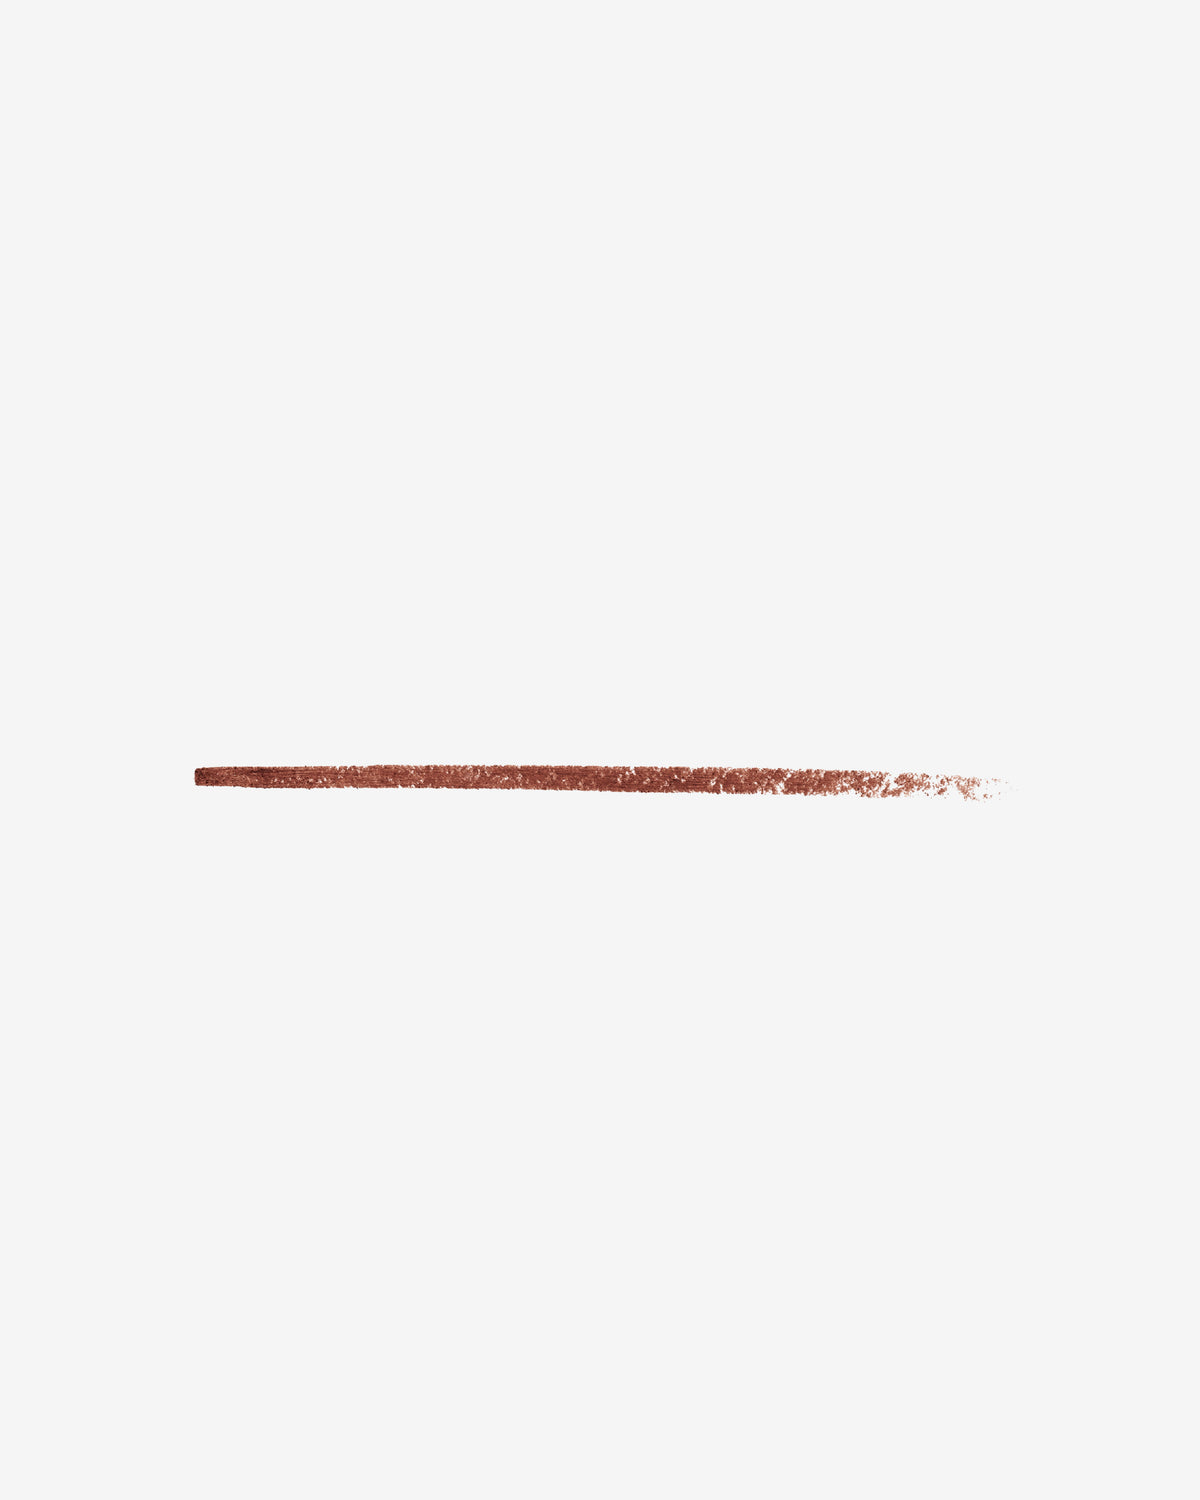 Double Wear 24H Stay-In-Place Lip Liner 1.2g